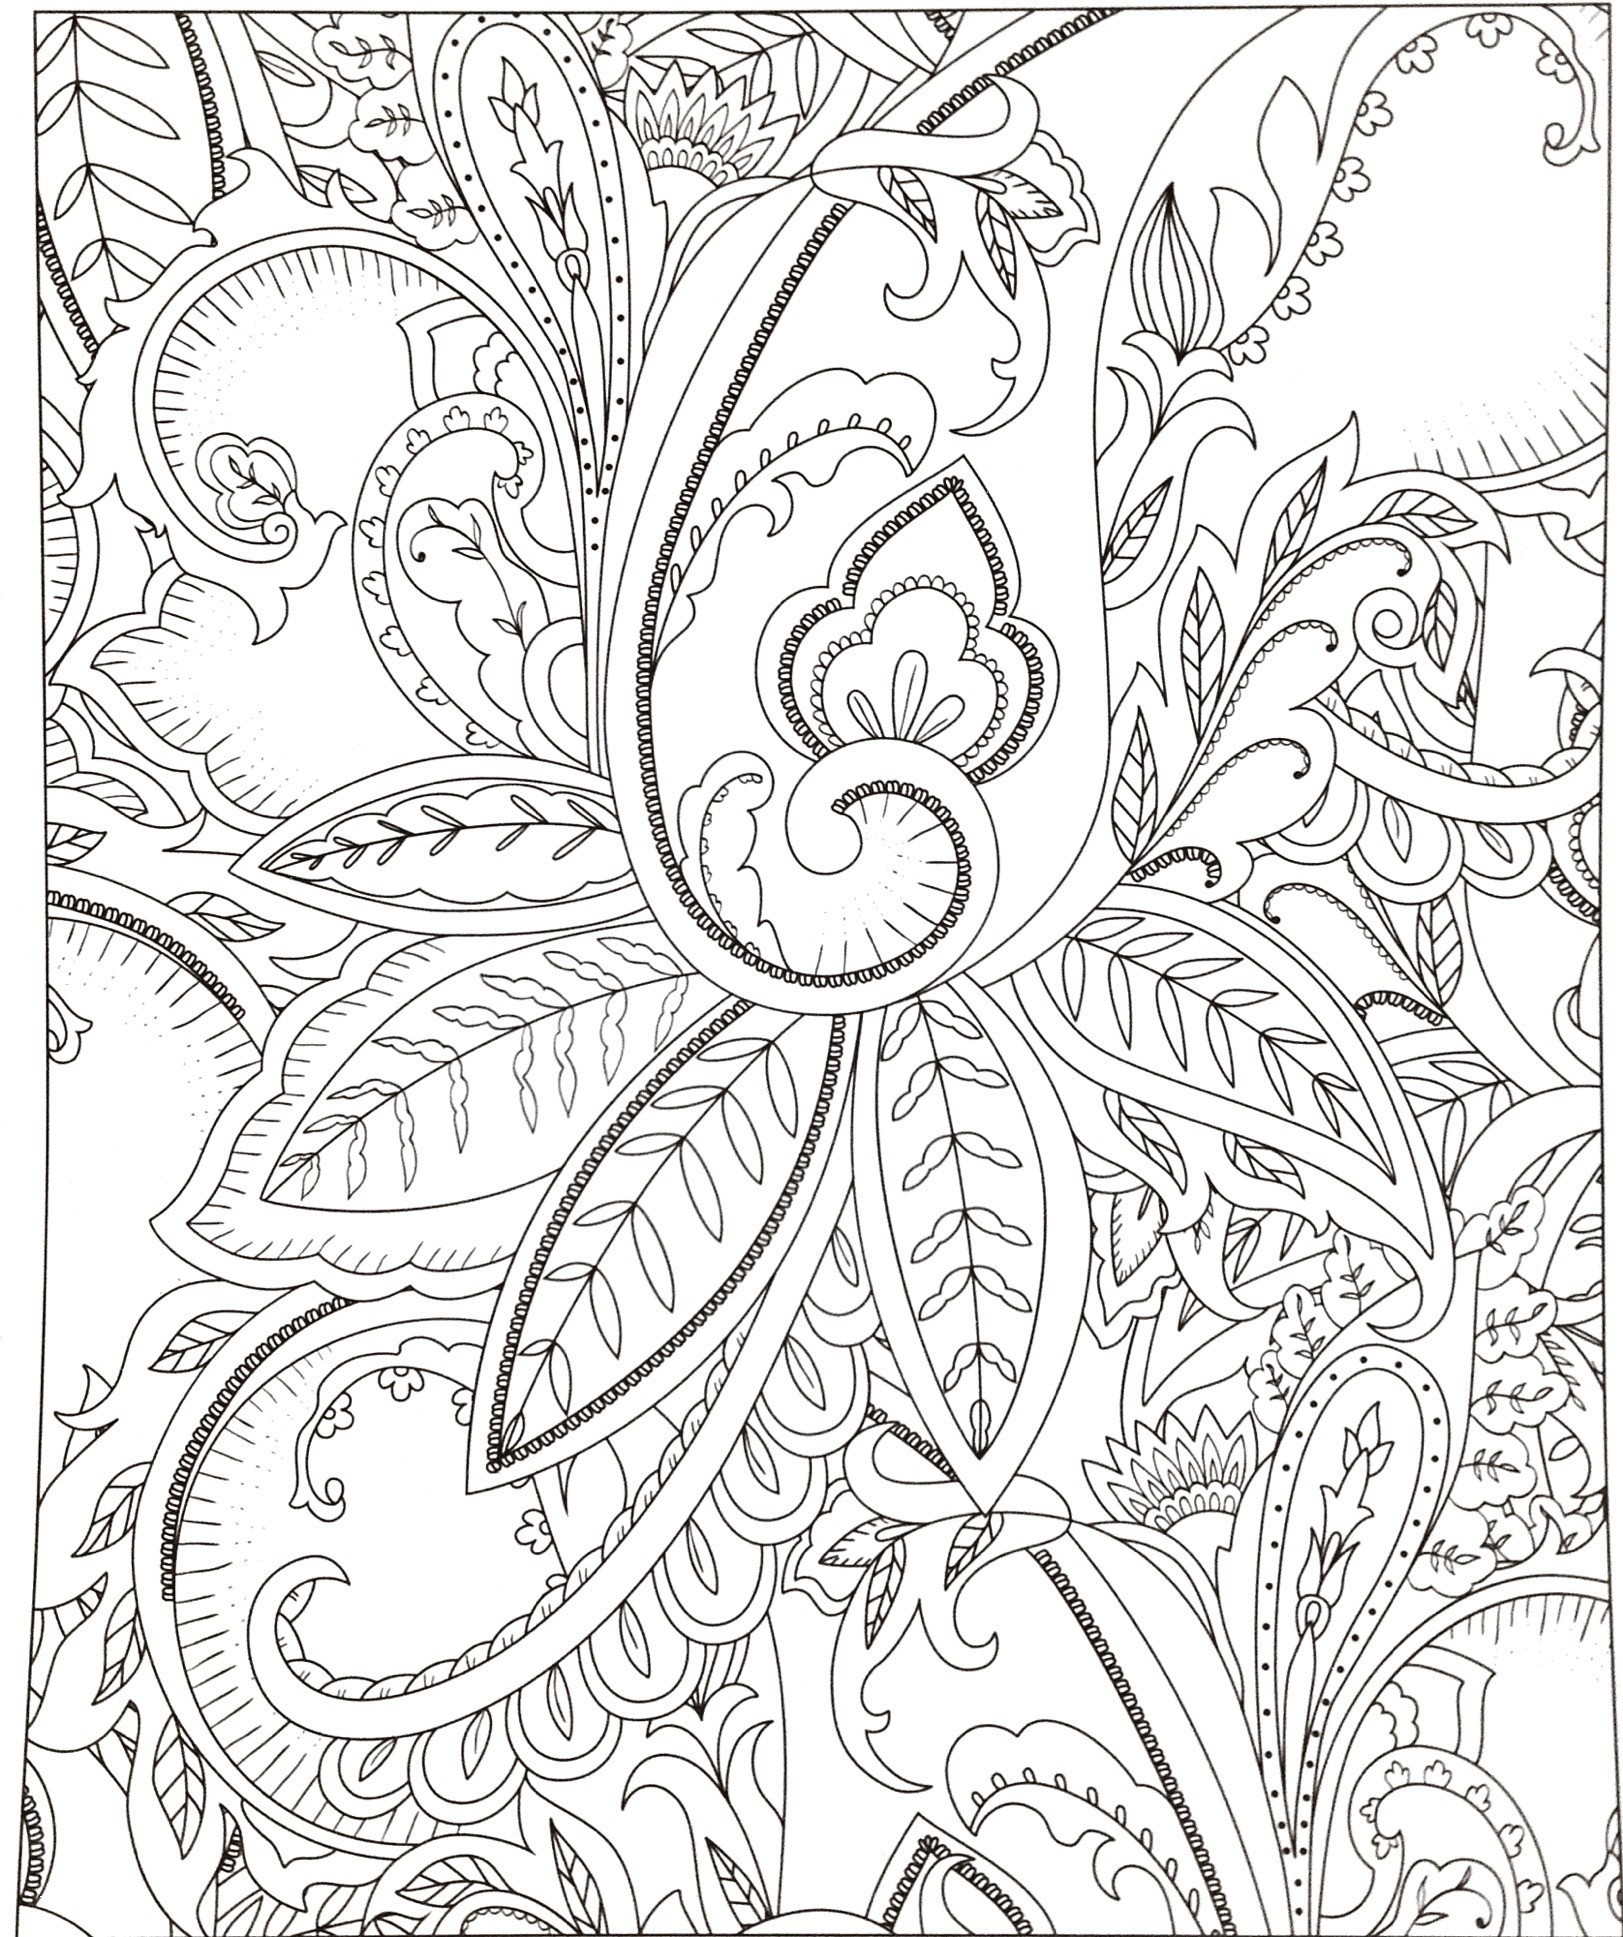 Free Coloring Fresh Book Page Image Beautiful Page Coloring 0d Free Coloring Pages – Fun